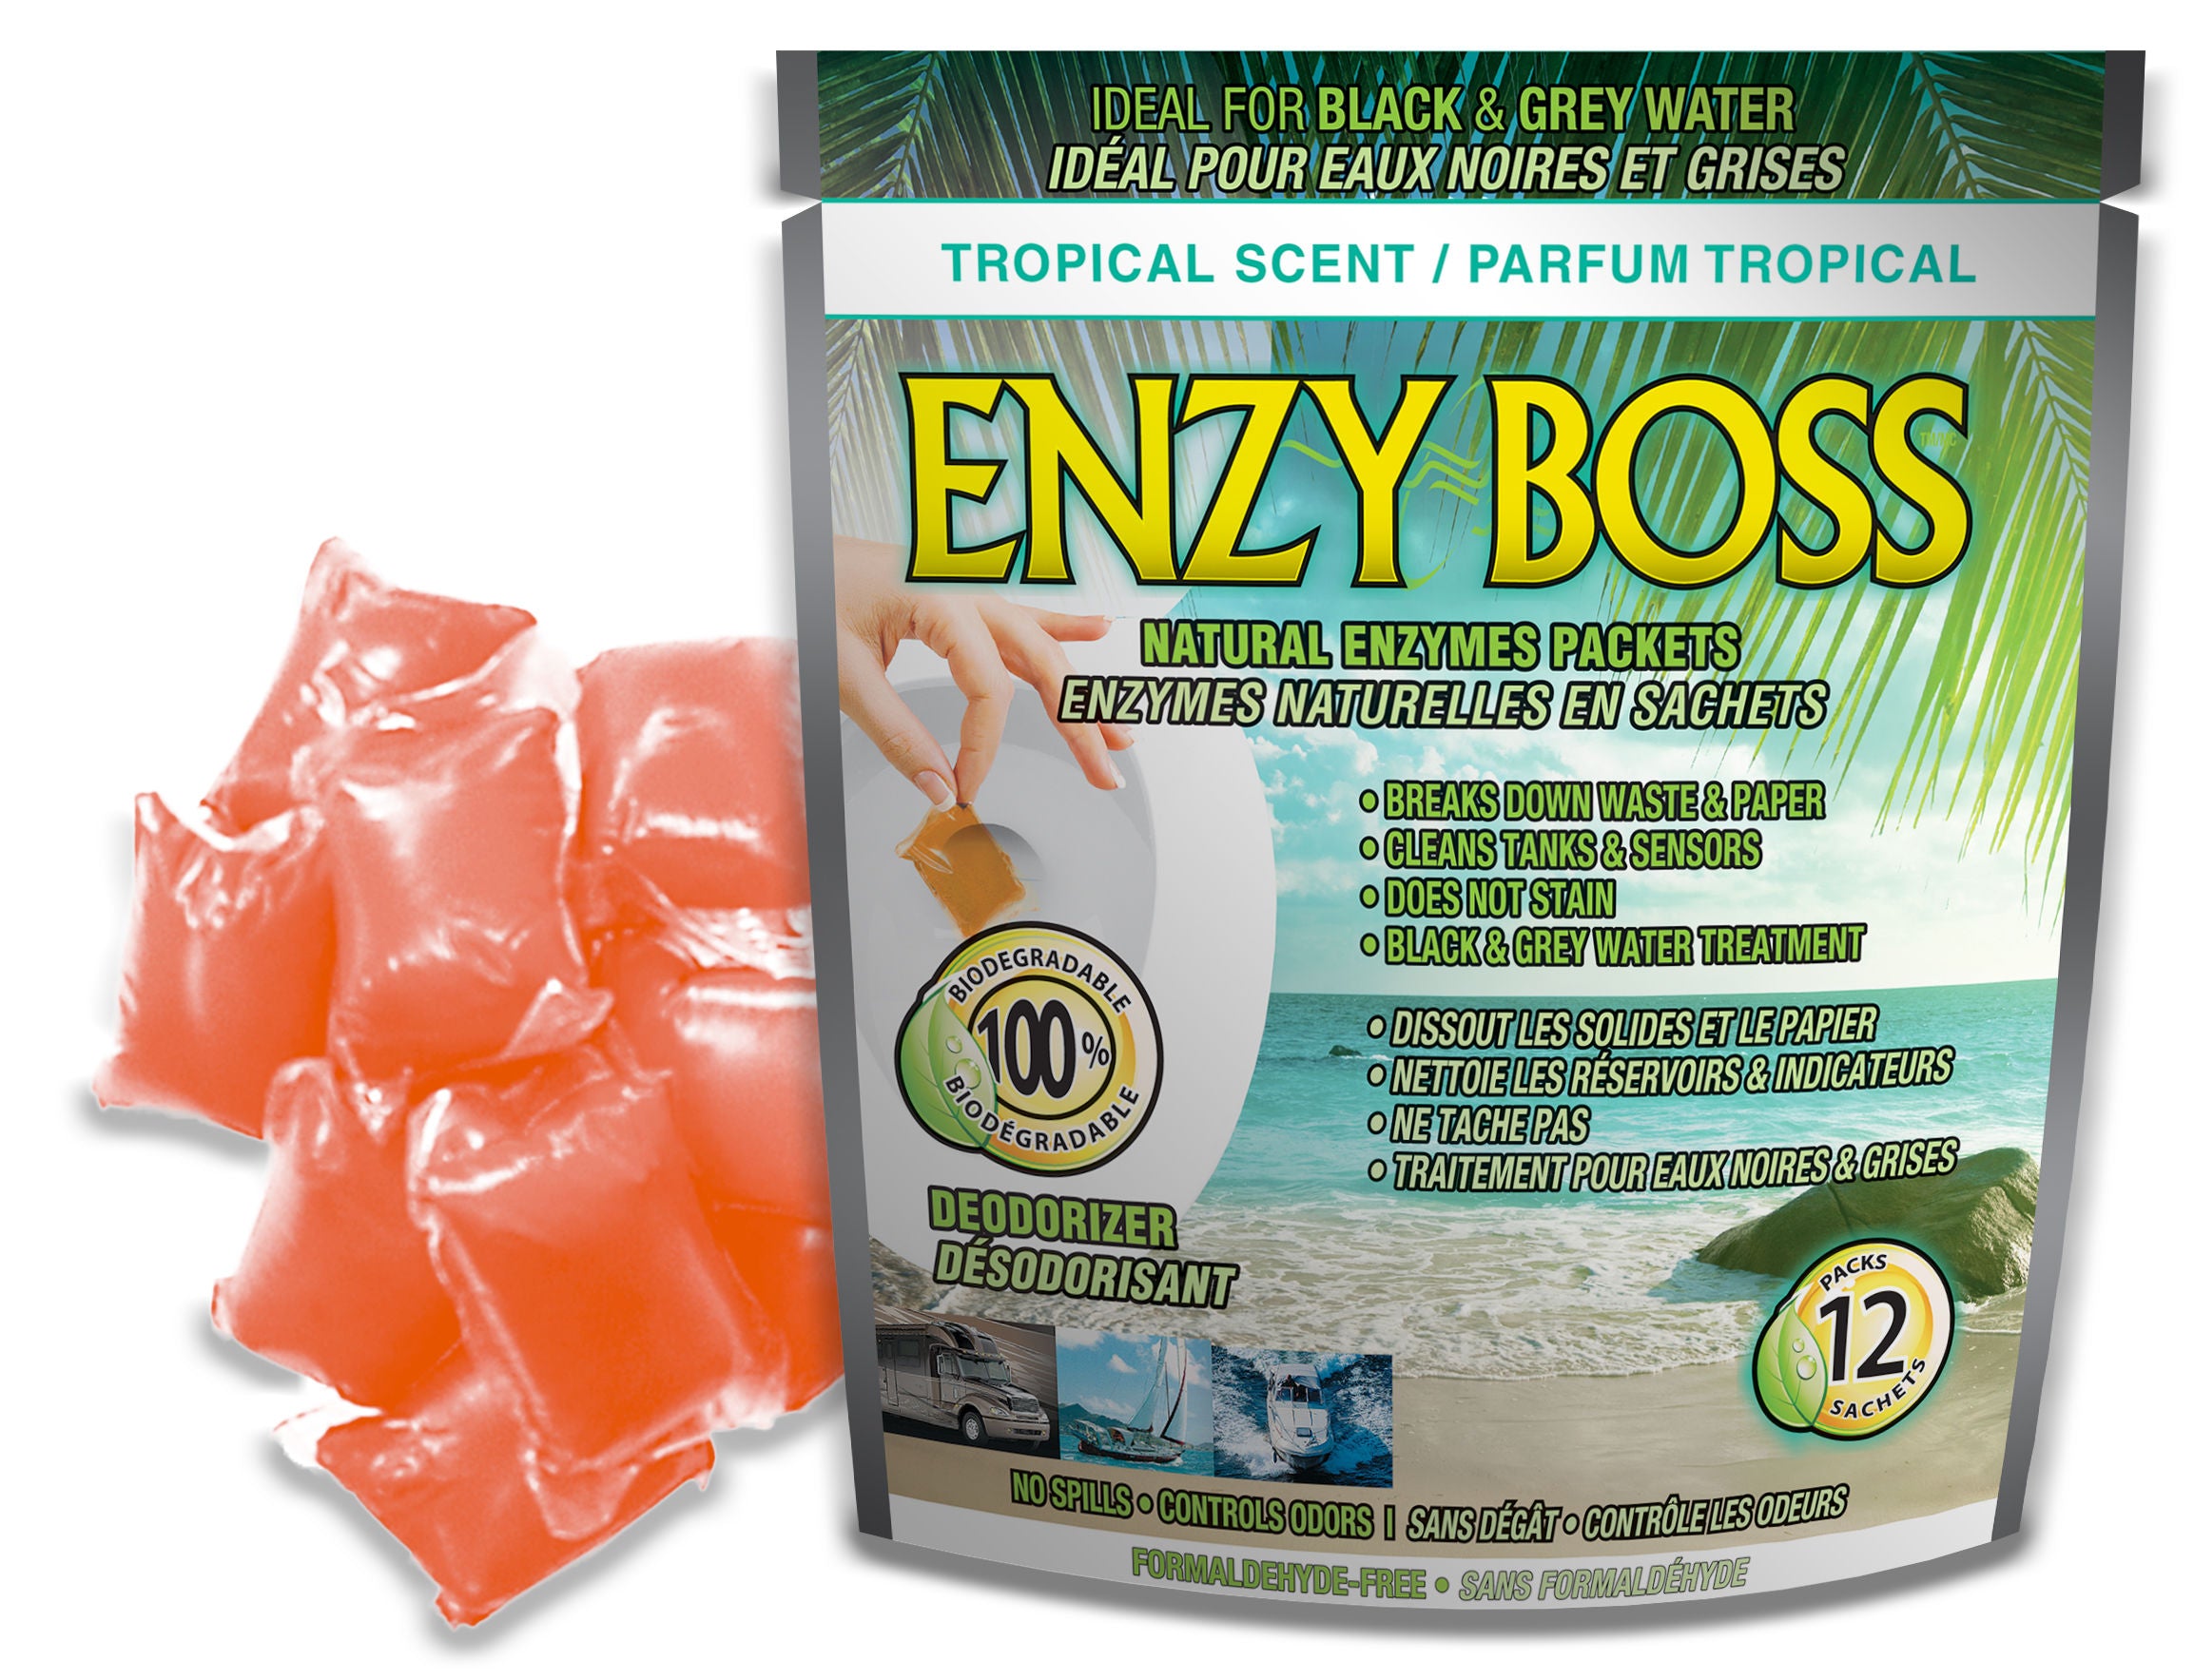 Enzy Boss 1766 - Box of 12, Enzy-Boss Tropical Packets (12 / bag)